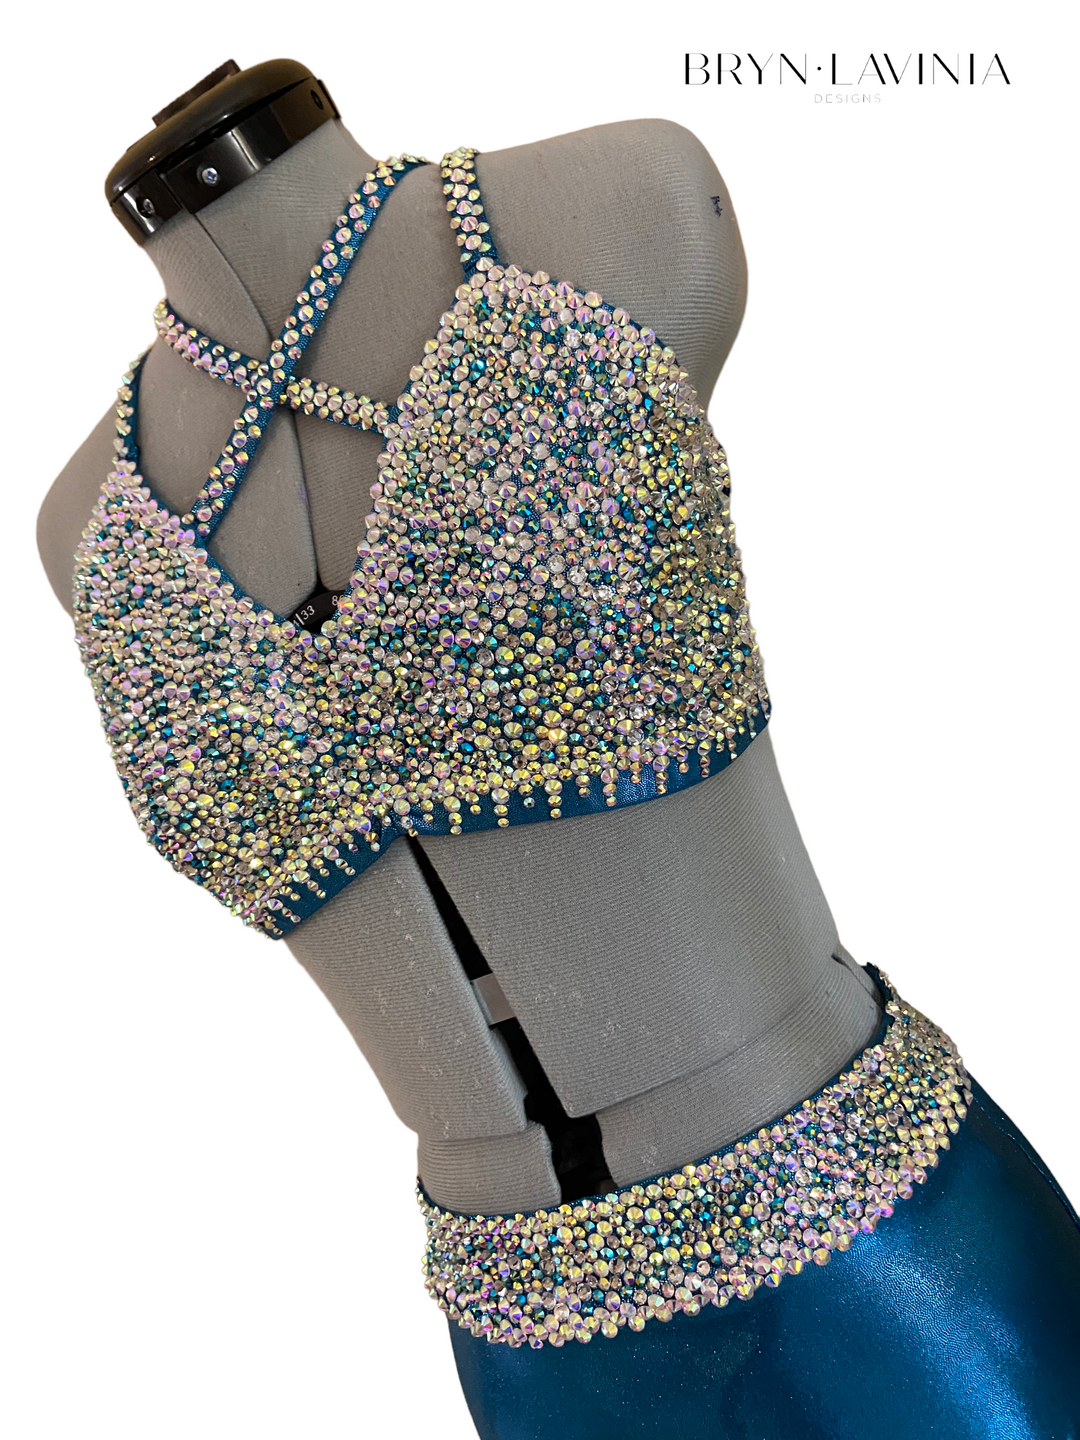 NEW Adult Small Ready-to-Ship metallic blue jazz costume